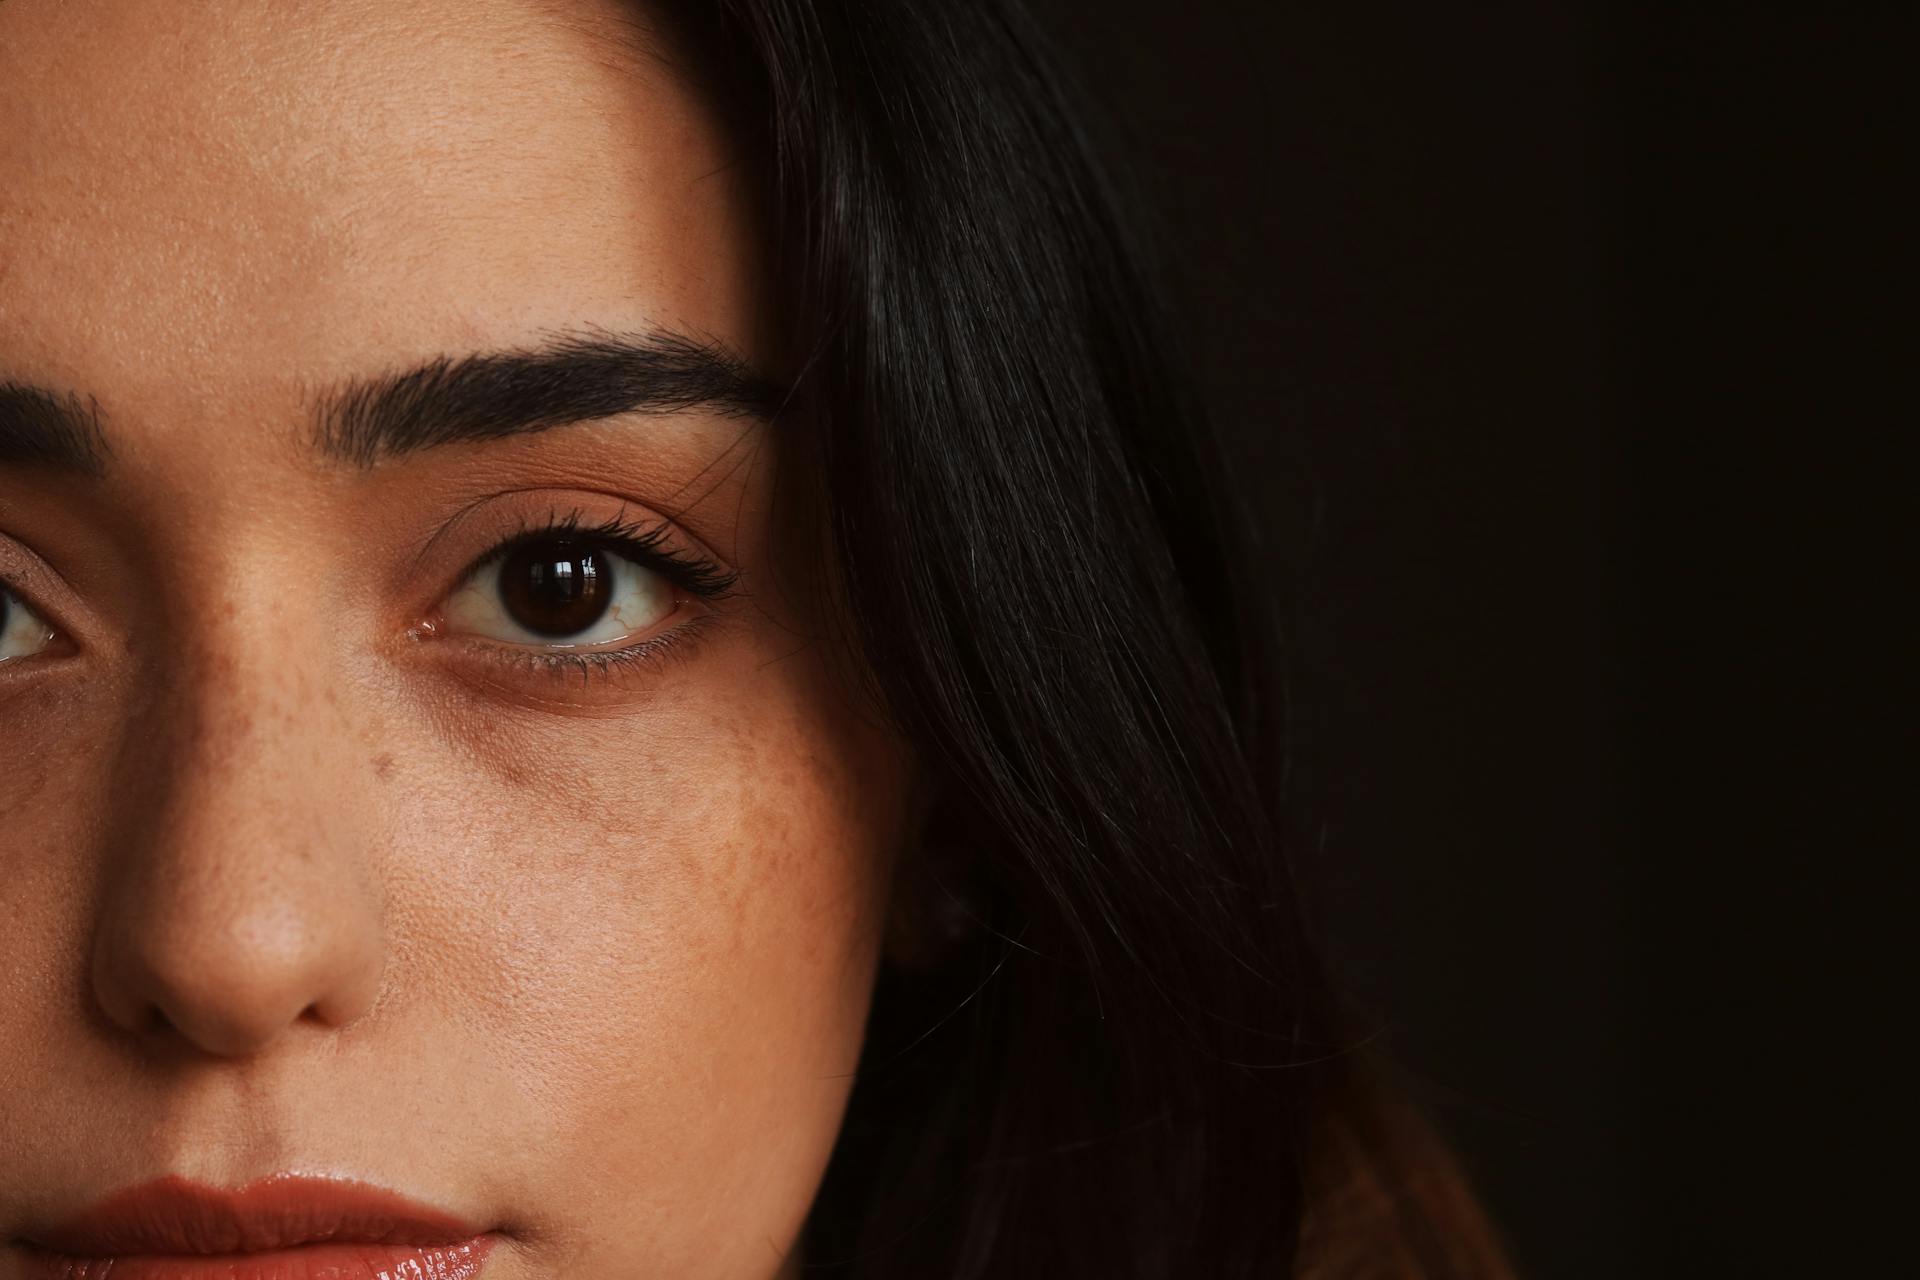 Close-up of a woman's face | Source: Pexels